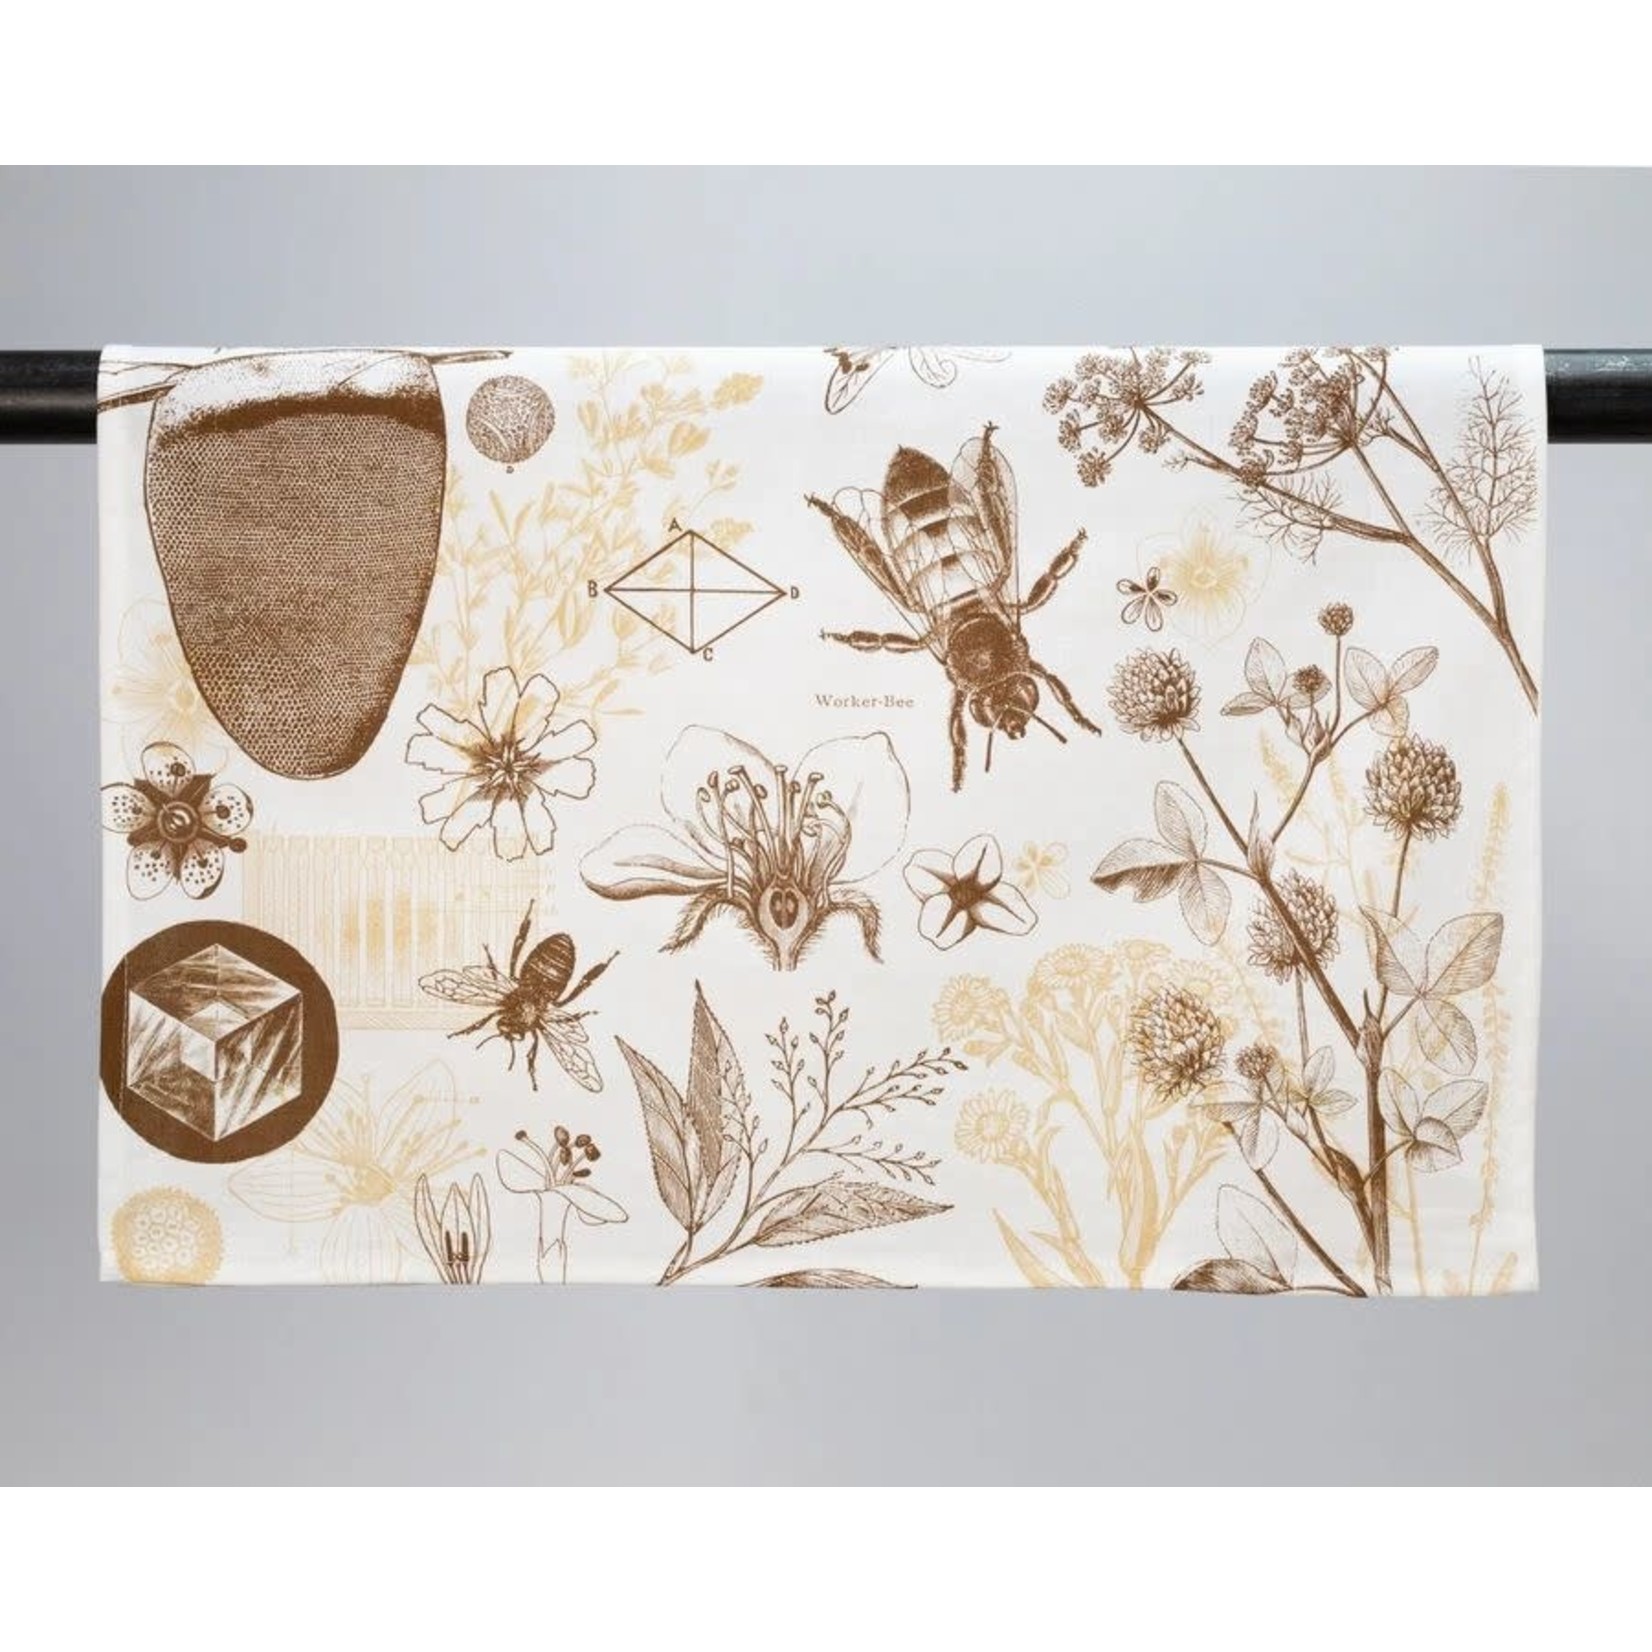 Agriculture and Food Honey Bee Printed Tea Towel